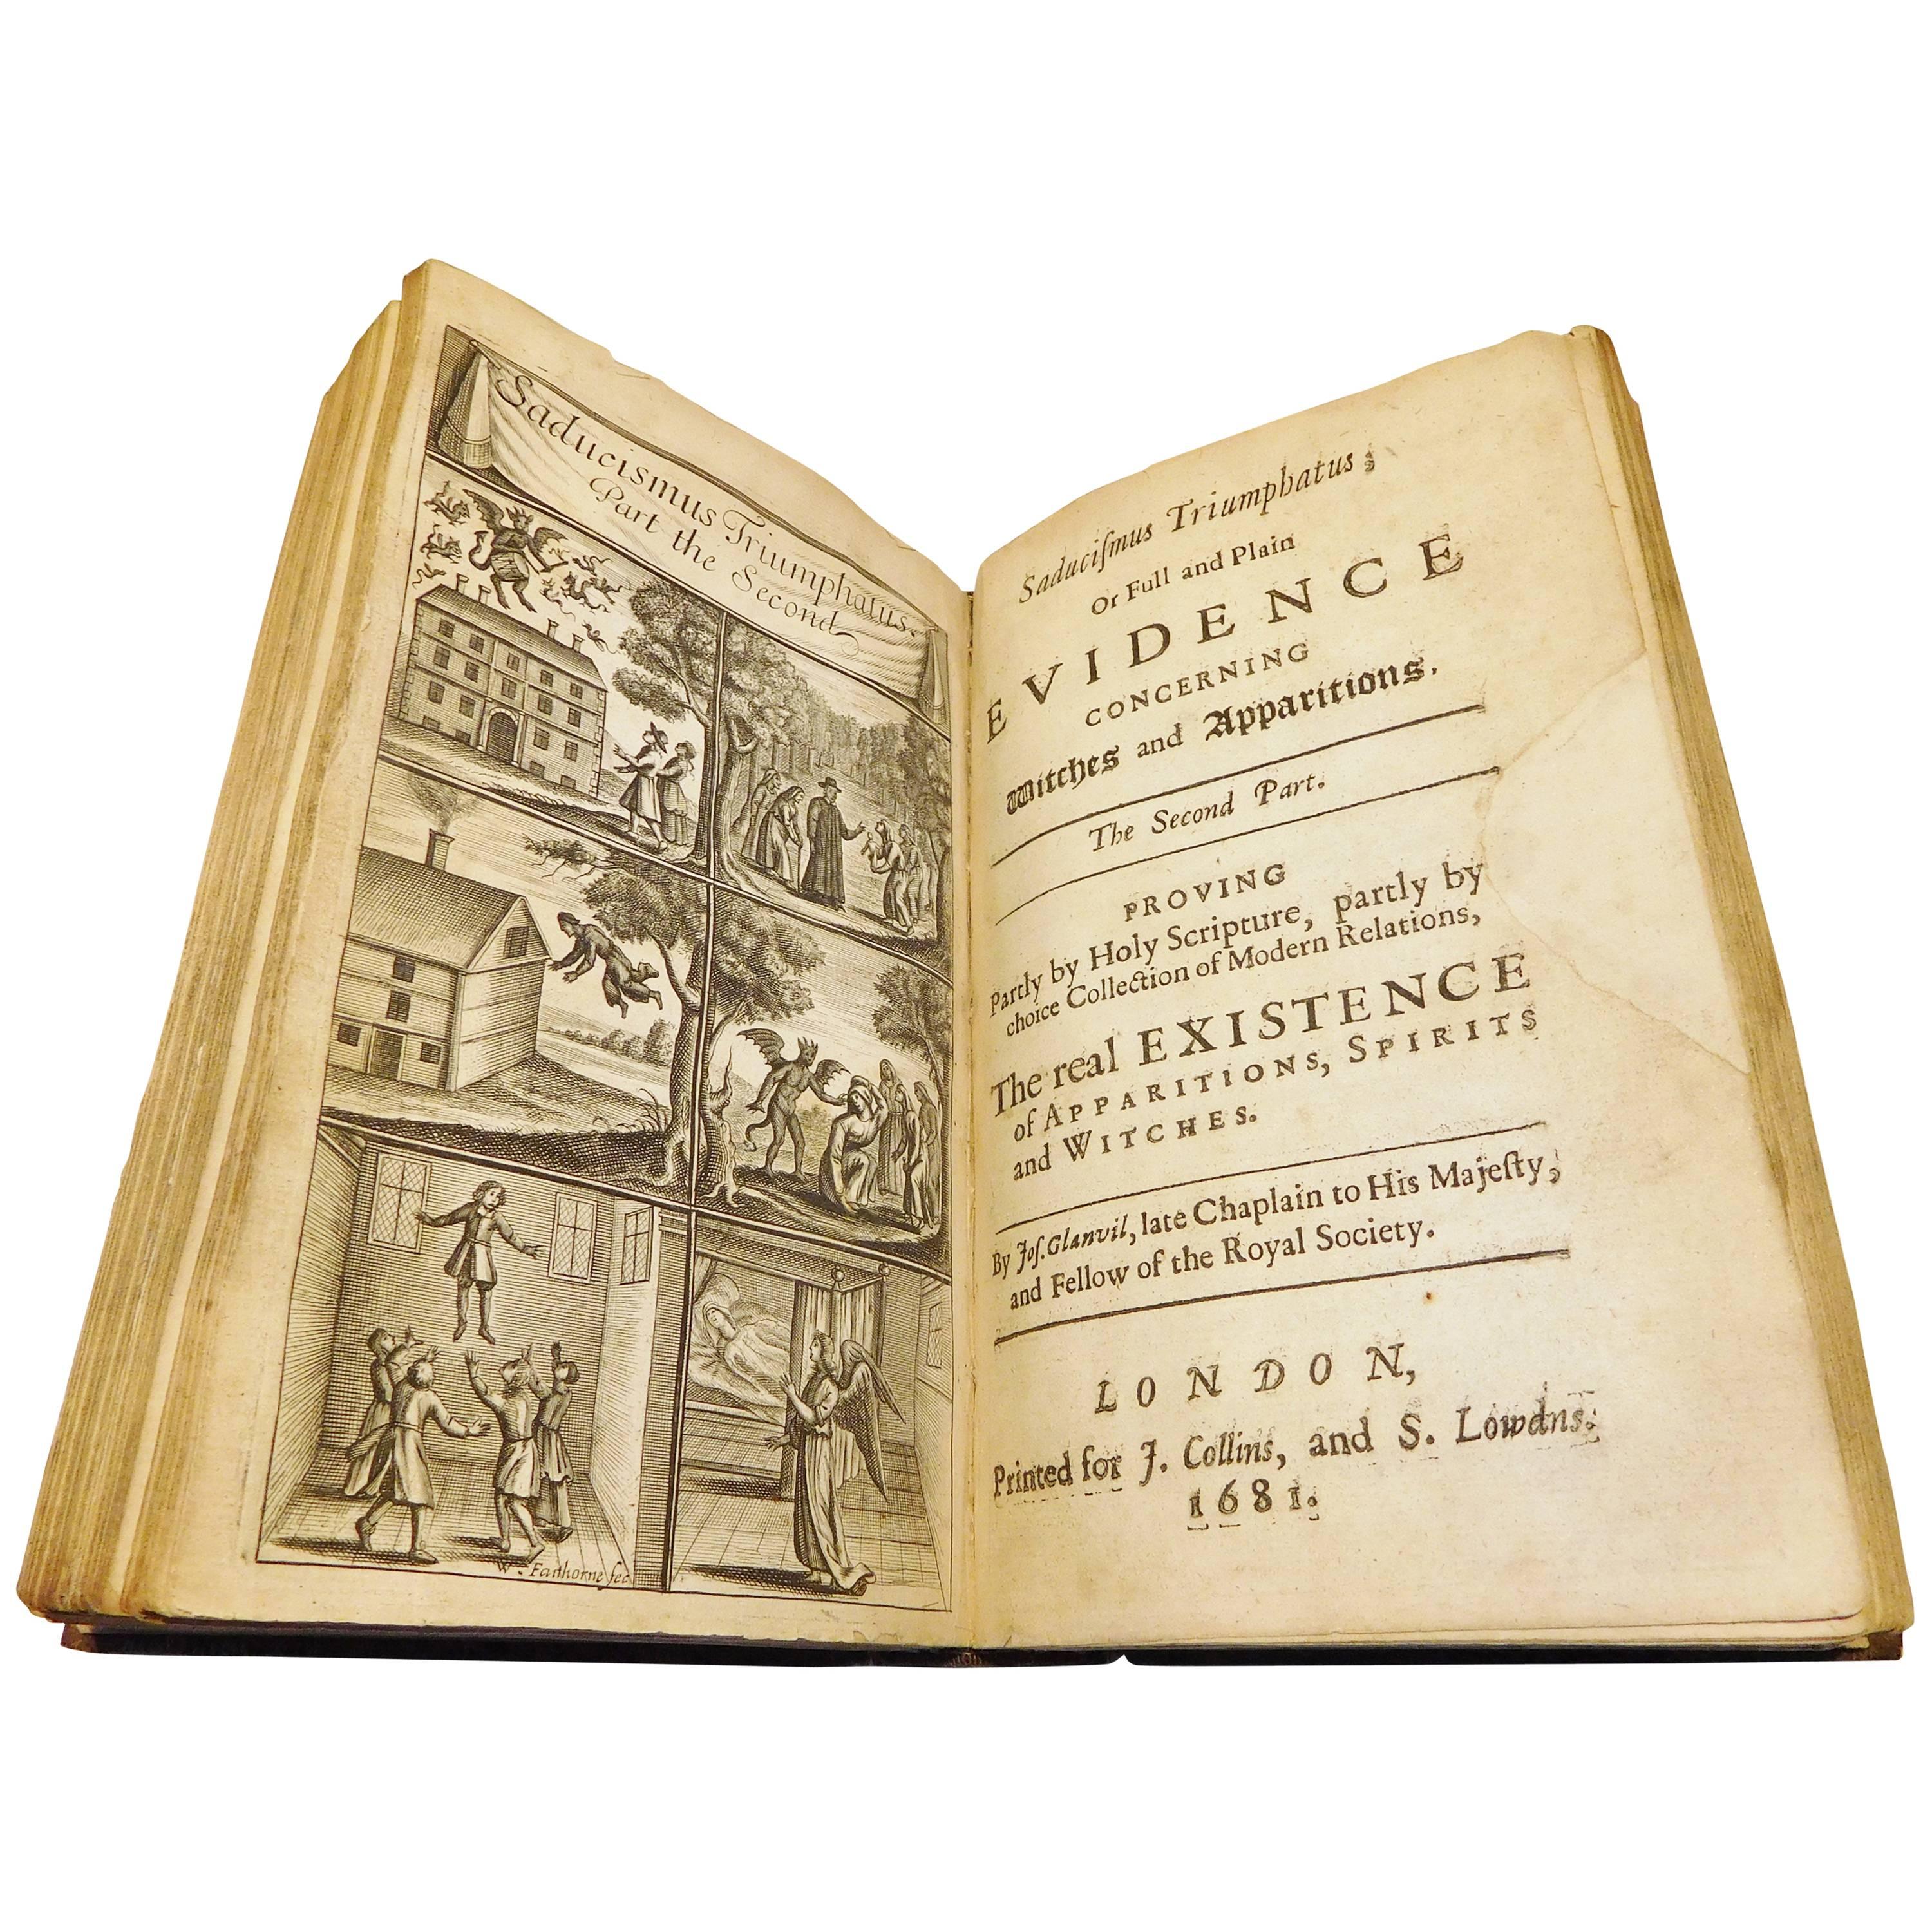 Glanvil's Book on the Real Existence of Witches, "Saducismus Triumphatus", 1681